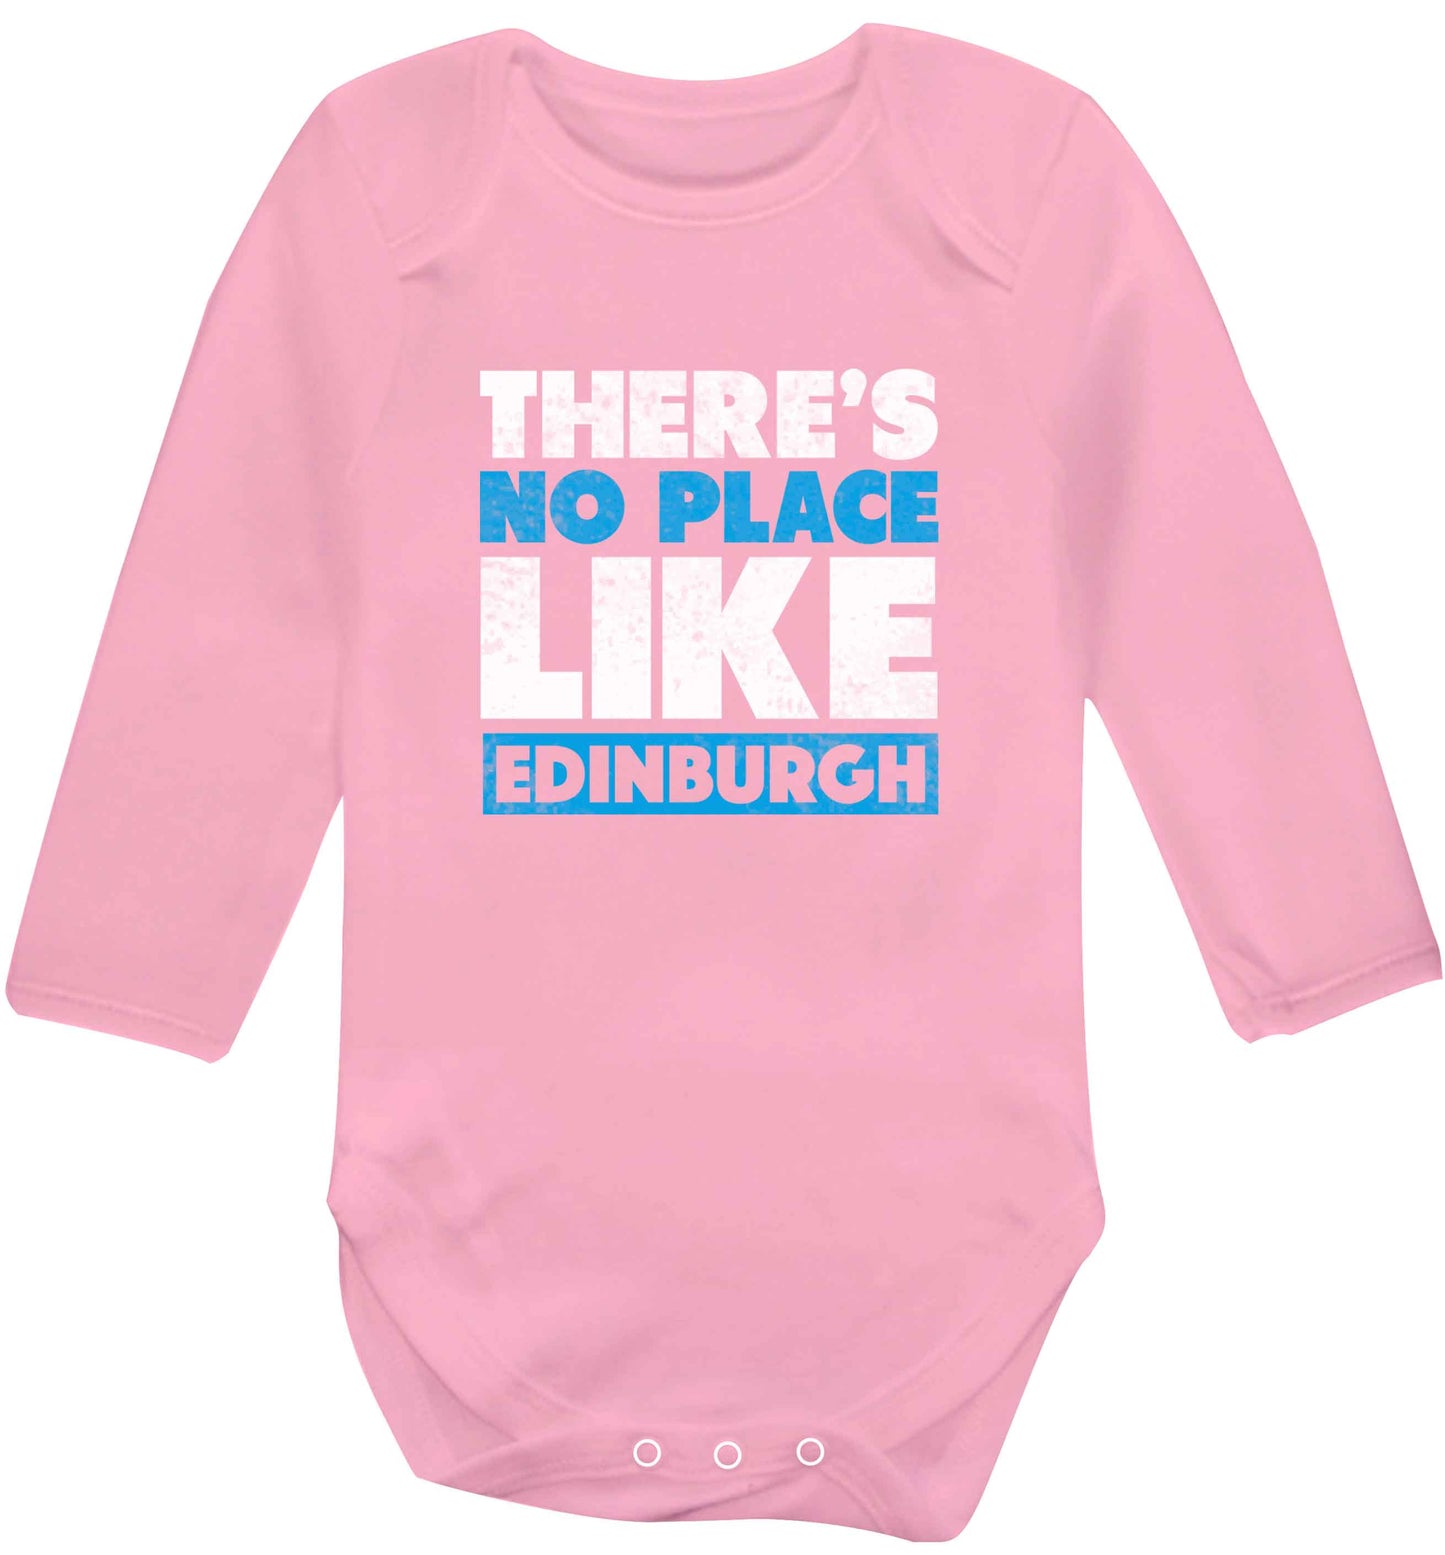 There's no place like Edinburgh baby vest long sleeved pale pink 6-12 months